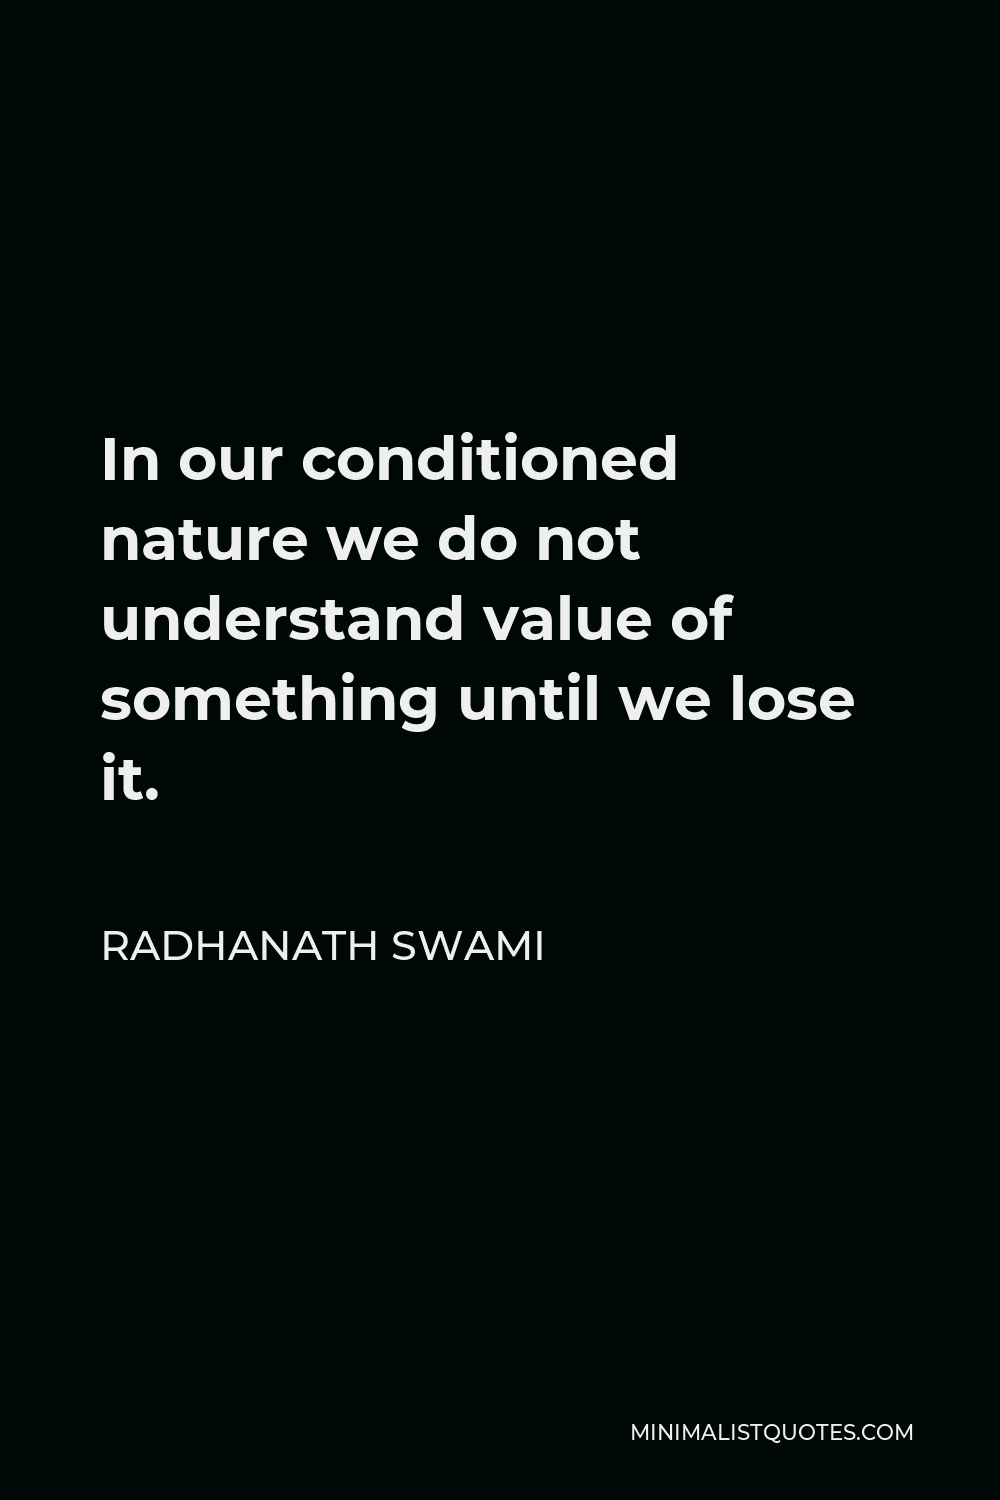 Radhanath Swami Quote - In our conditioned nature we do not understand value of something until we lose it.